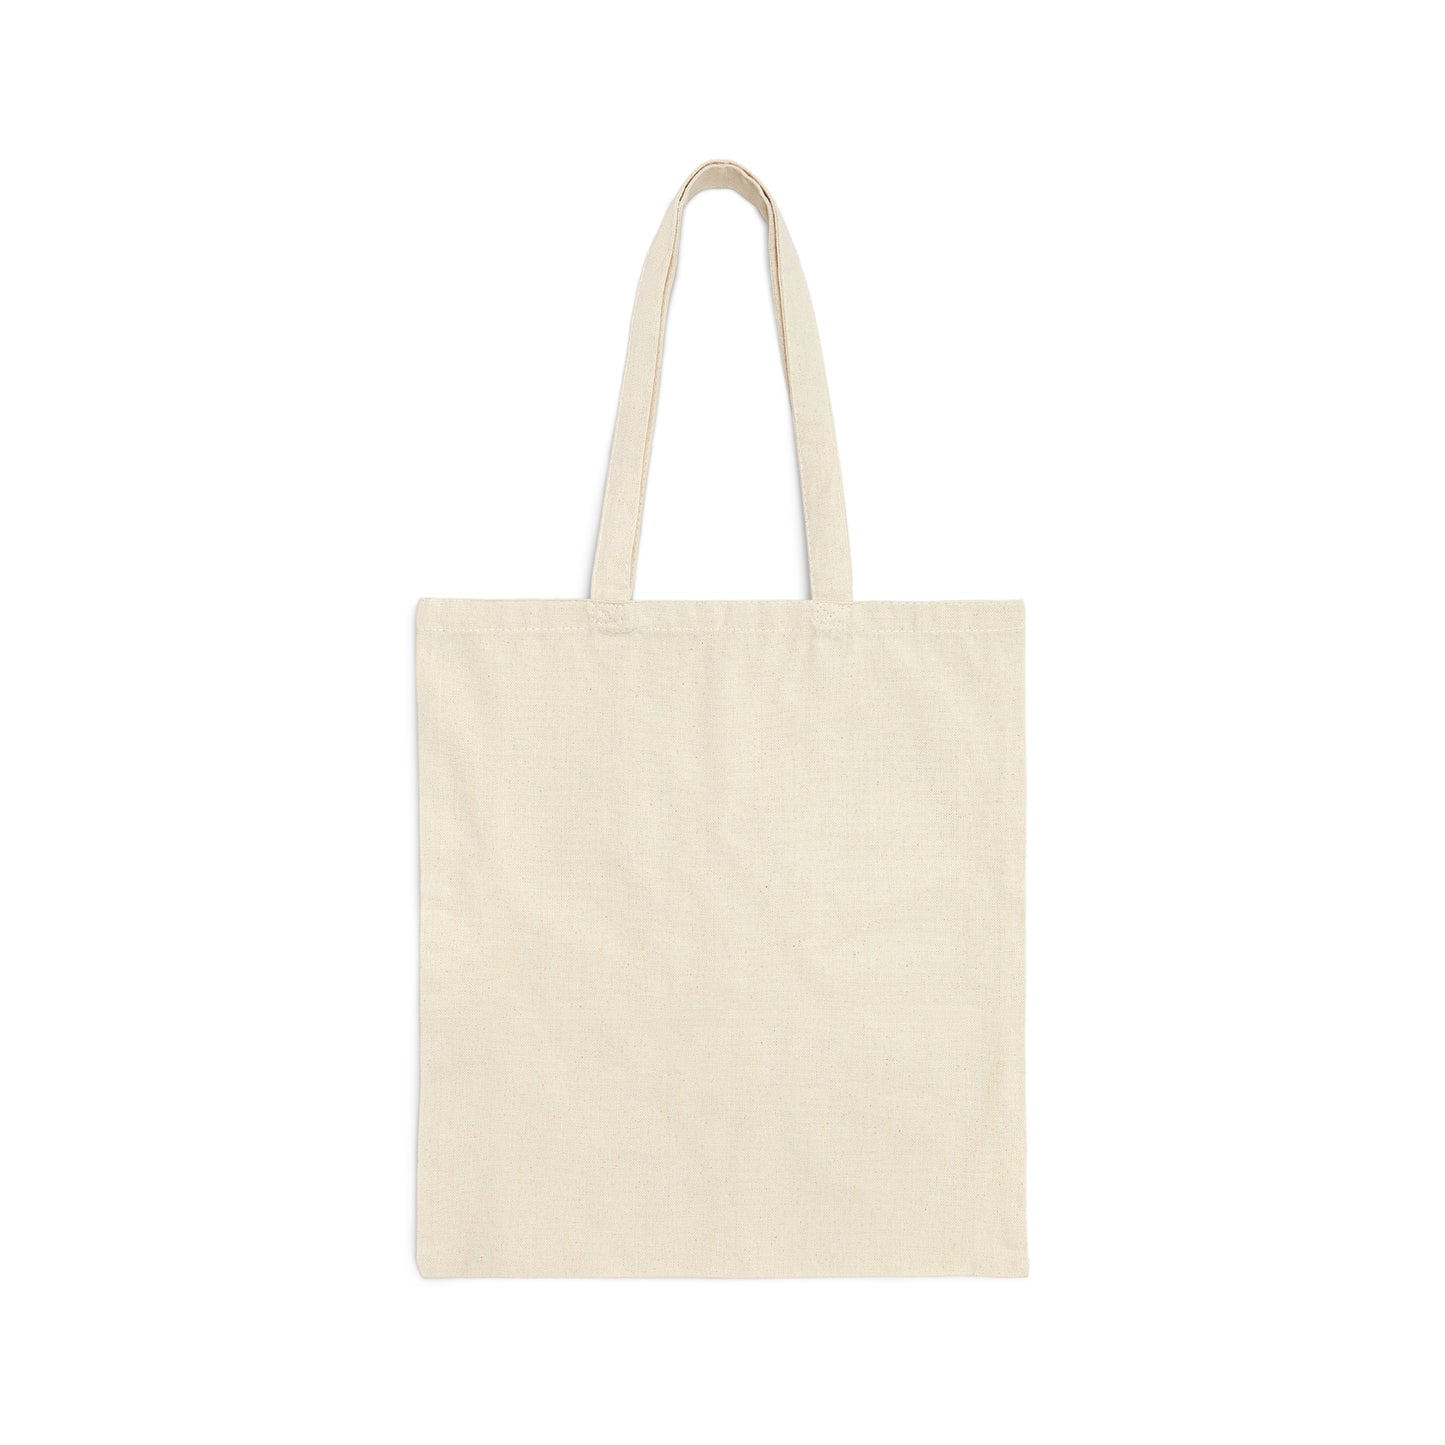 Stay Deadly Tote Bag